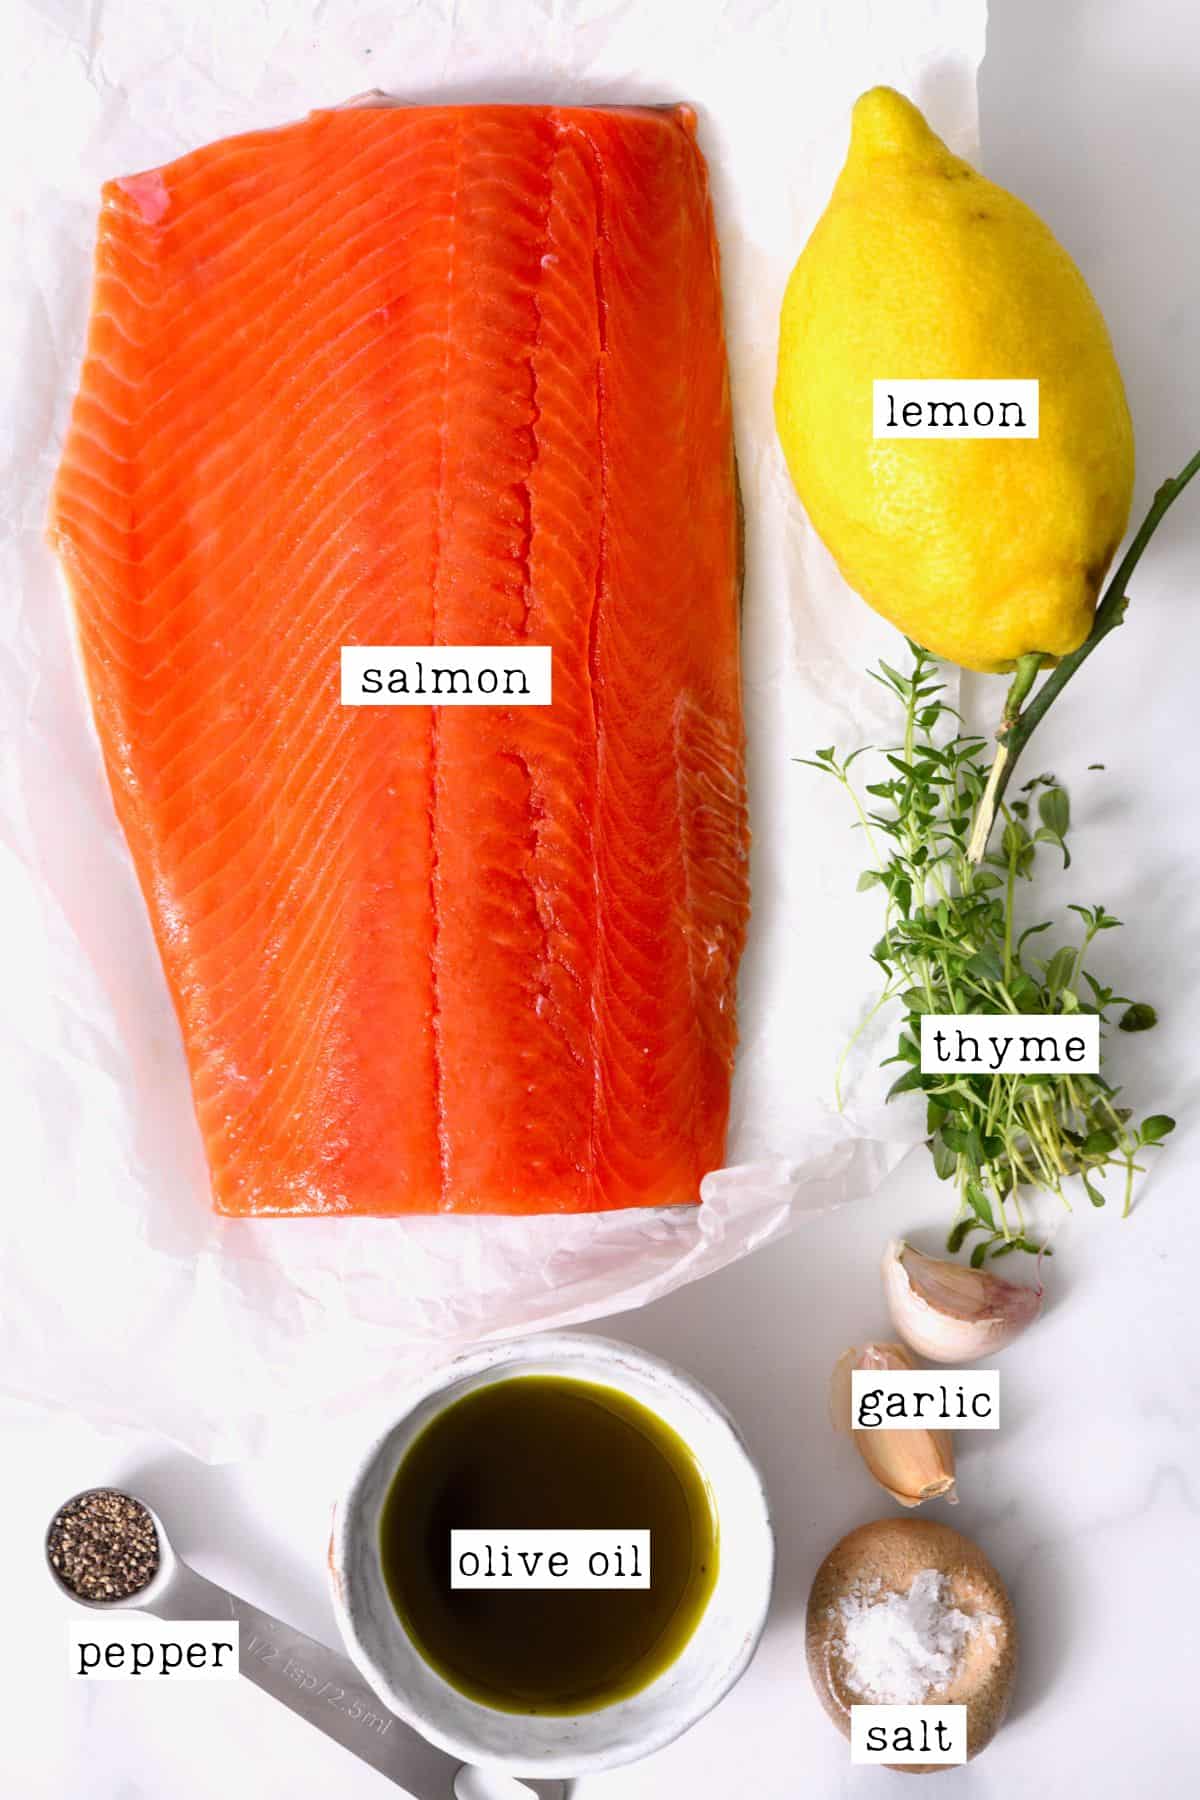 Ingredients for oven baked salmon